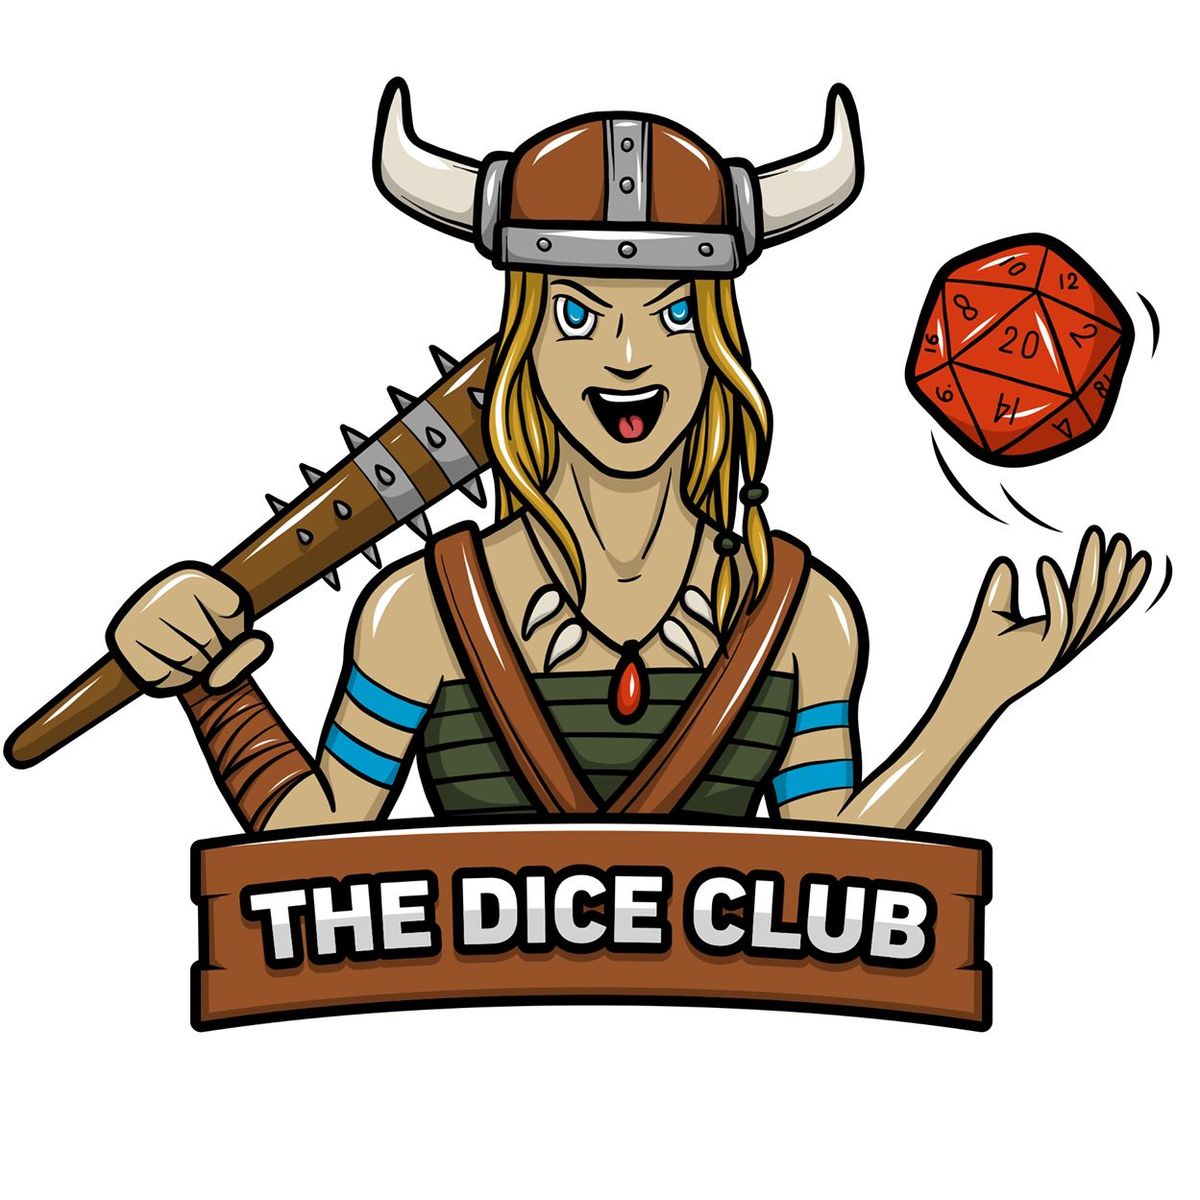 Citadel Community Painting Sessions at The Dice Club